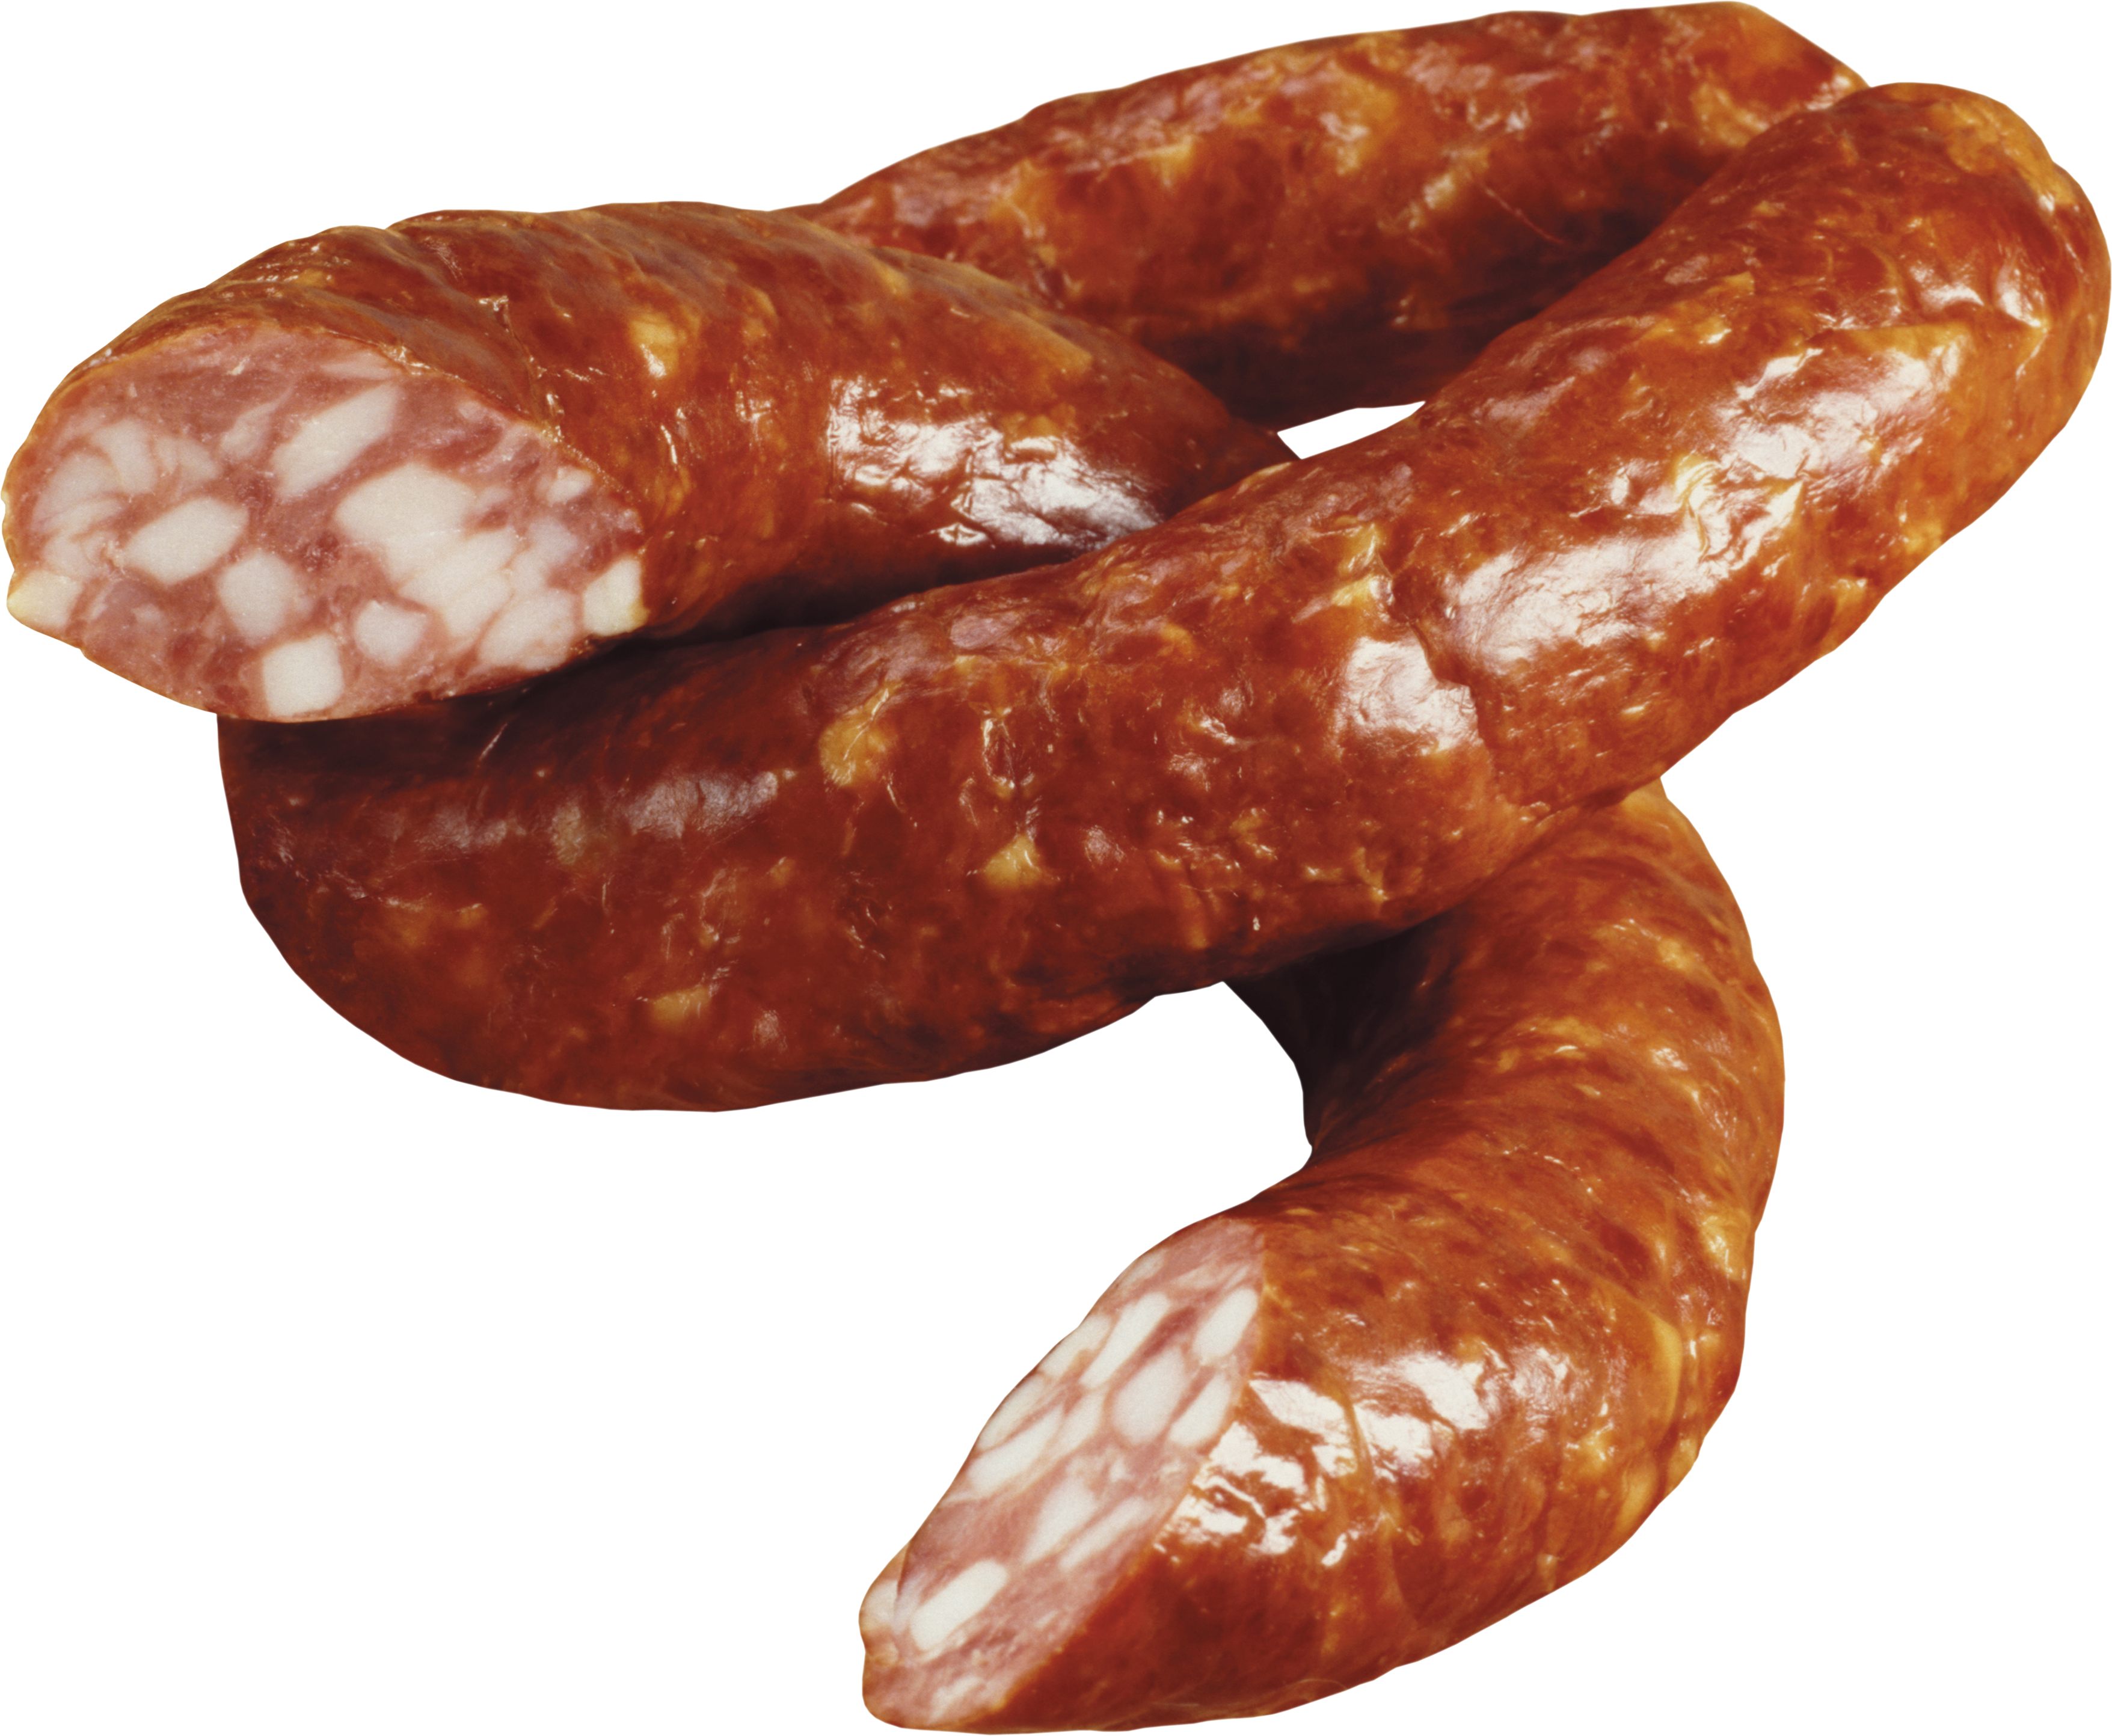 Traditional Cured Sausages